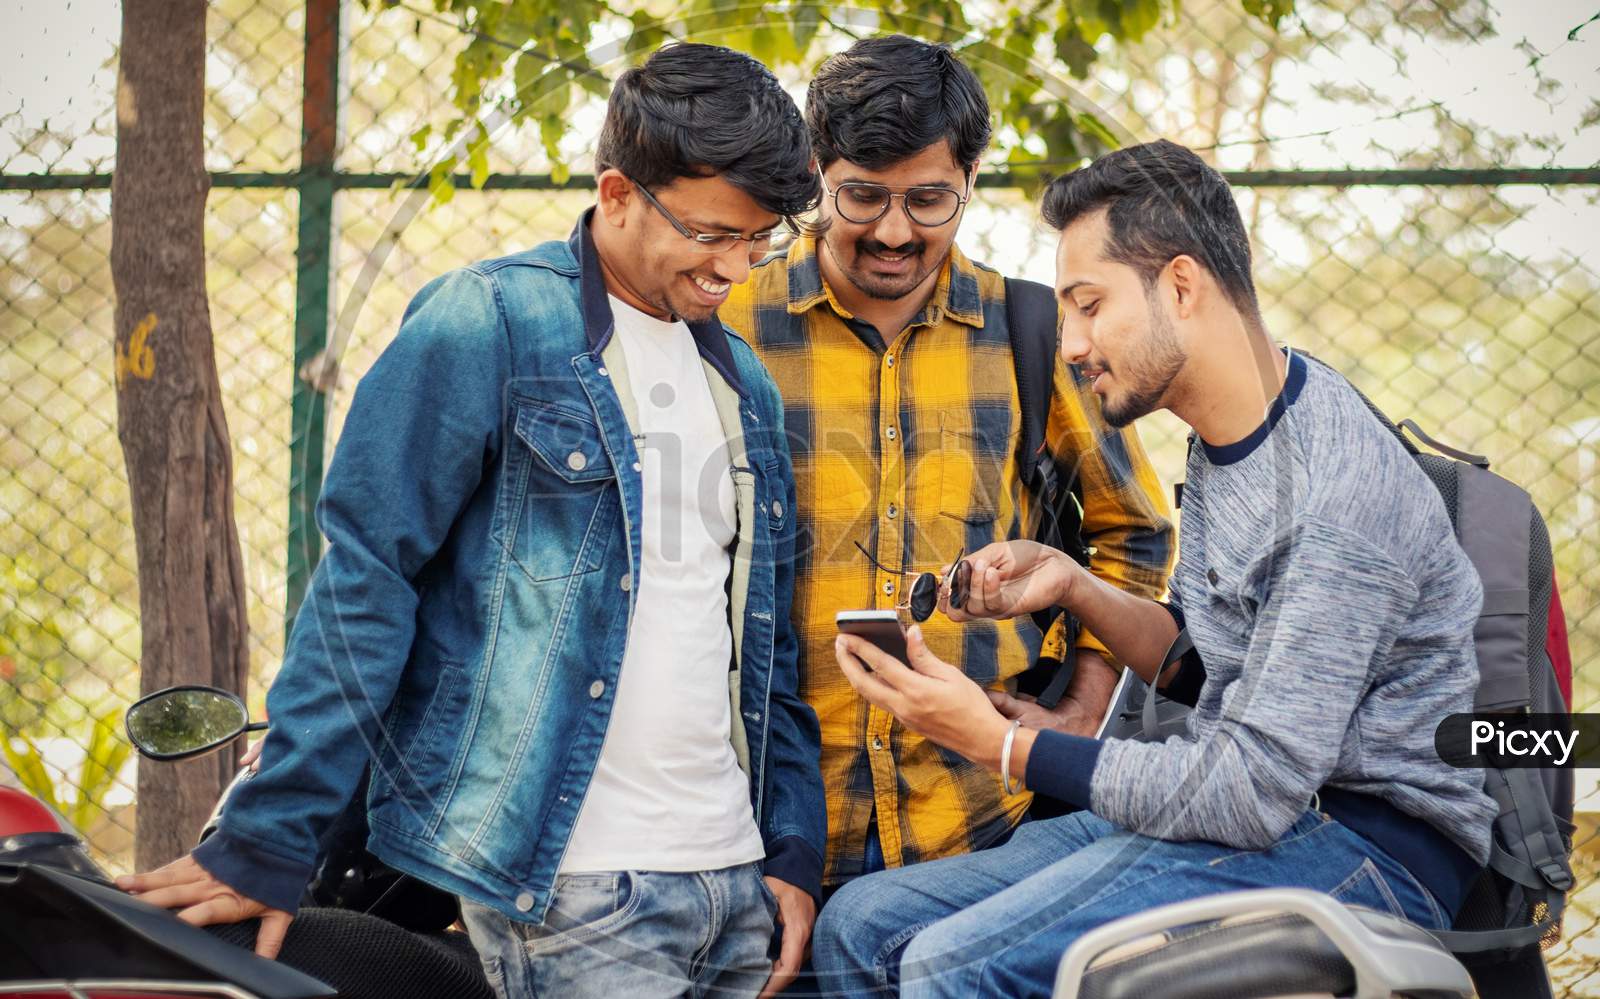 Students Busy On Mobile At College Parking Area On Bike - Young Millennials Busy On Phones And Technology - Concept Of Friendship And Urban Youthful Lifestyle.